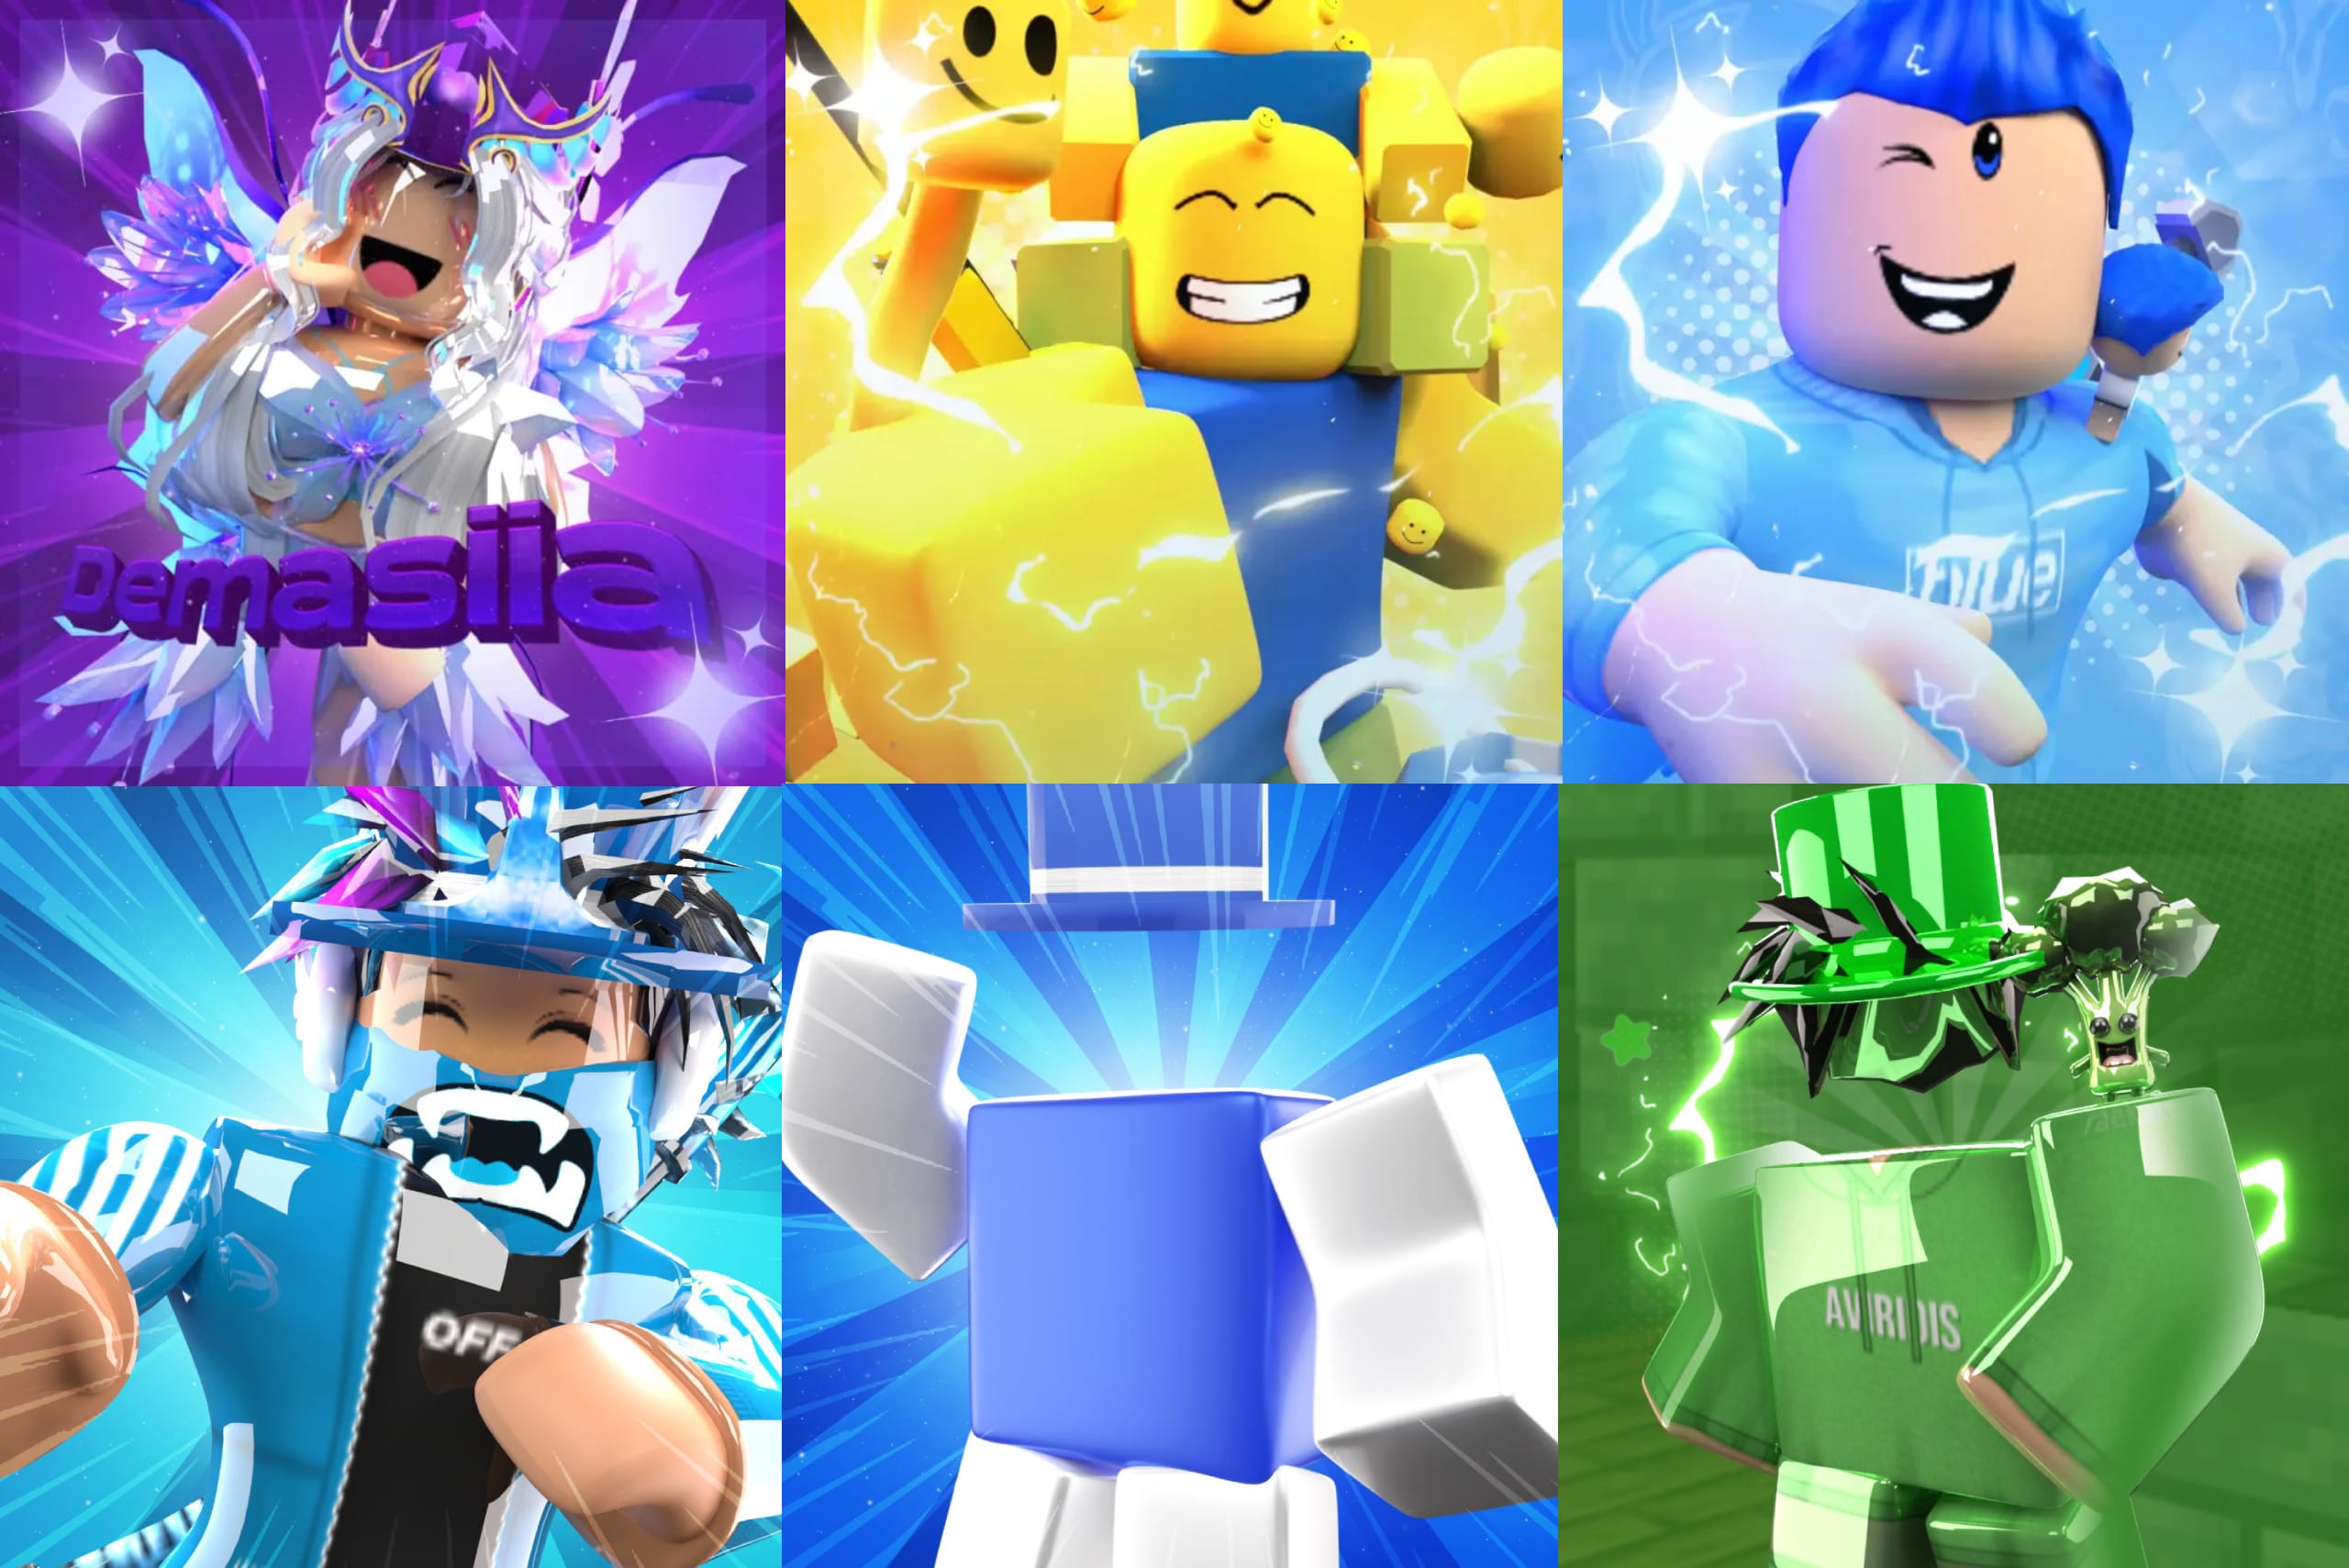 3 FREE ROBLOX GFX INTROS (BOY VERSION) (MUST GIVE CREDIT) *NO TEXT